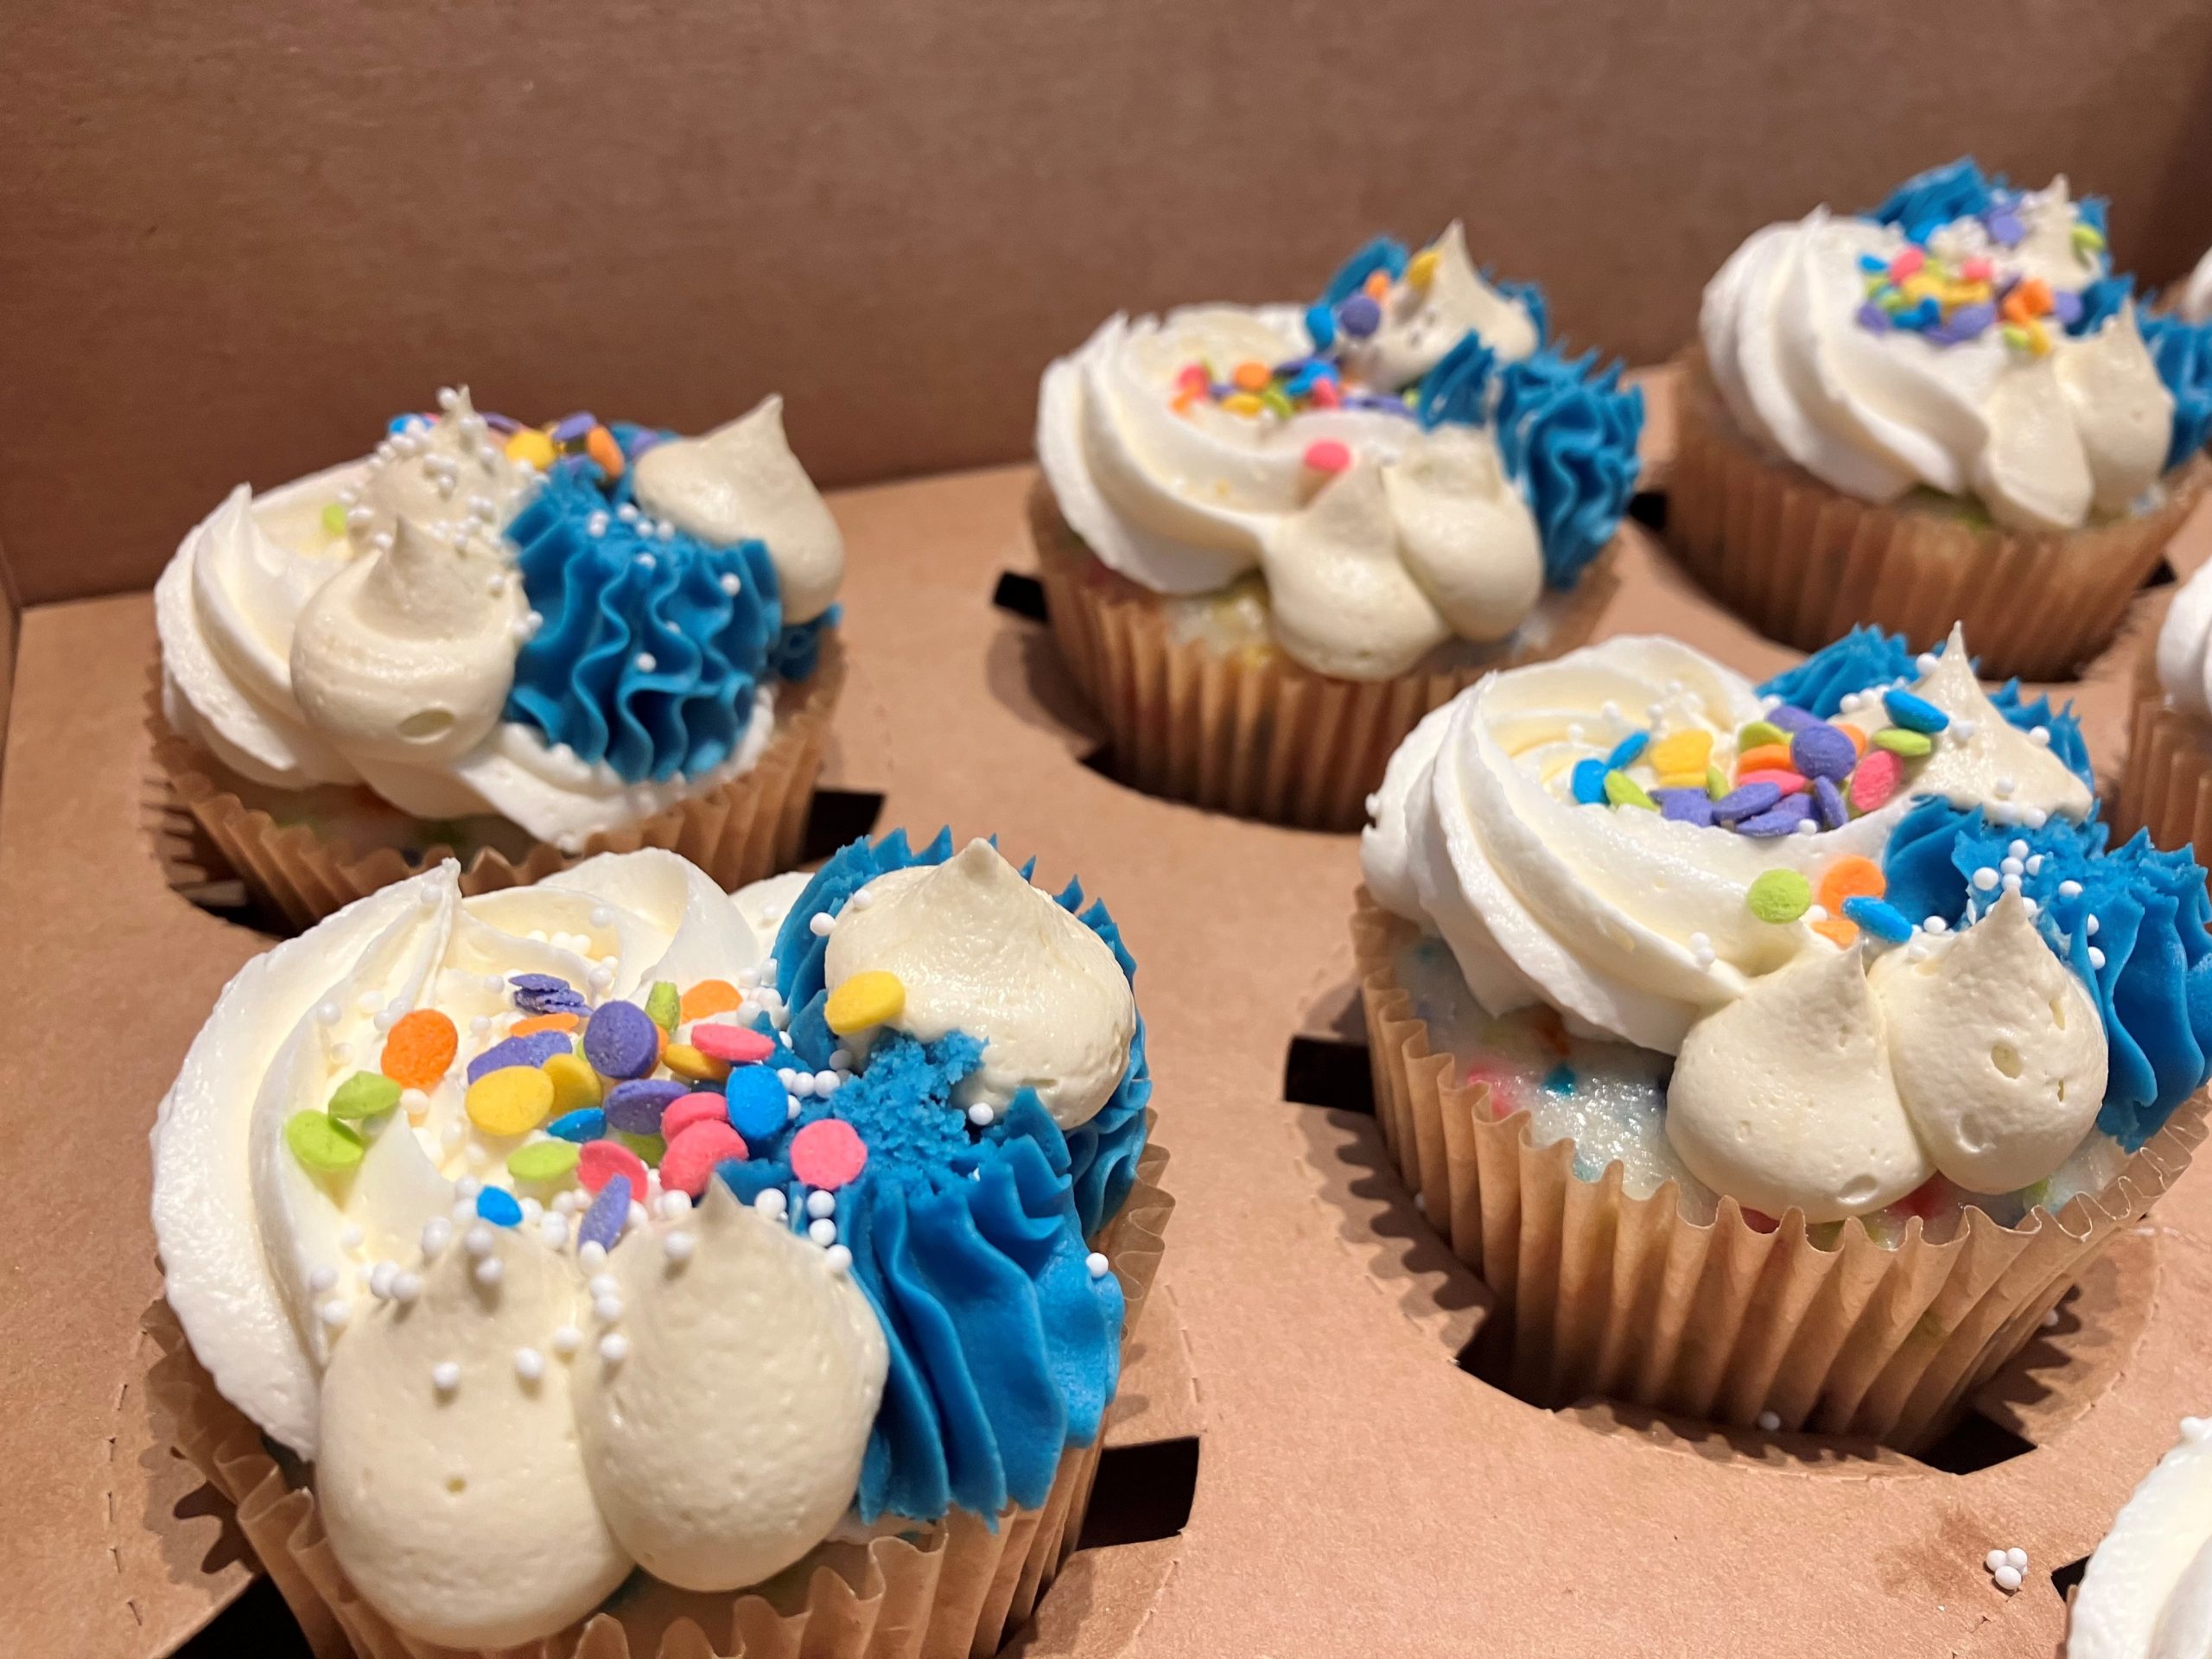 This photo shows cupcakes decorated with white and blue frosting